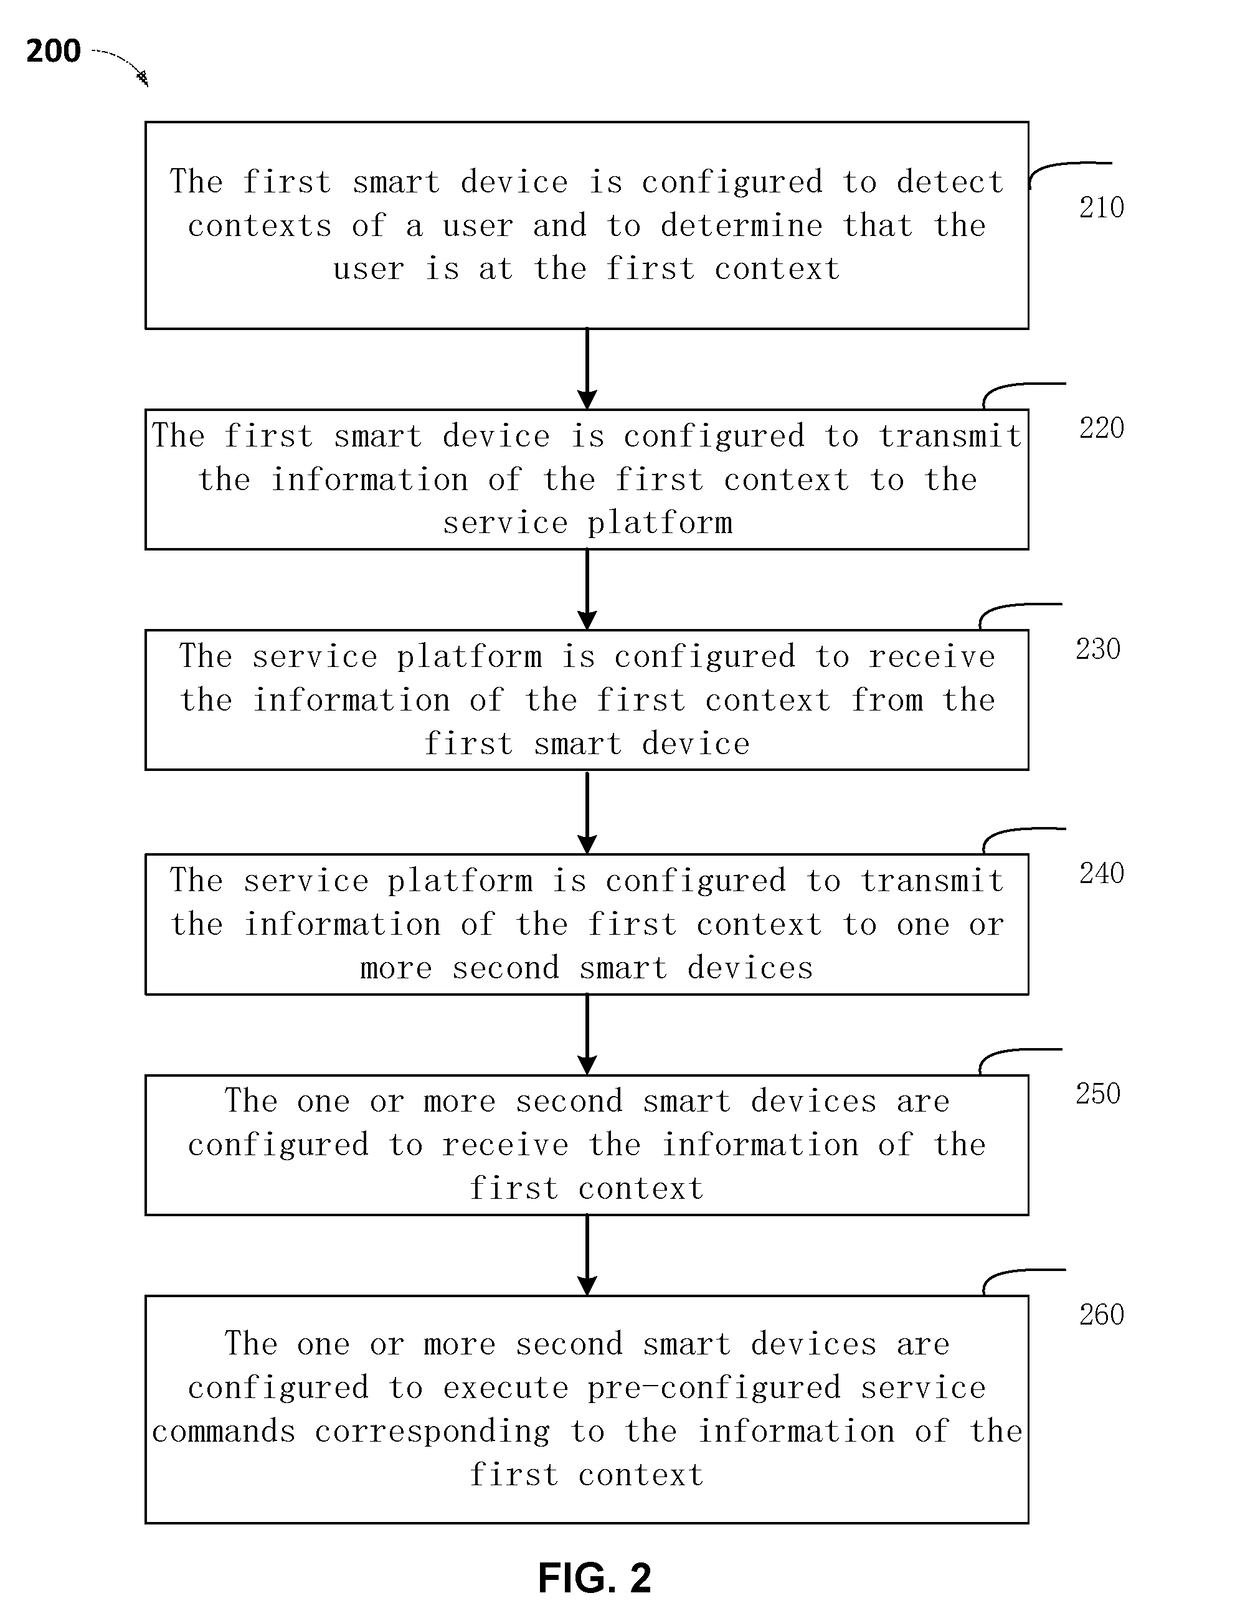 Method and apparatus for providing context-aware services